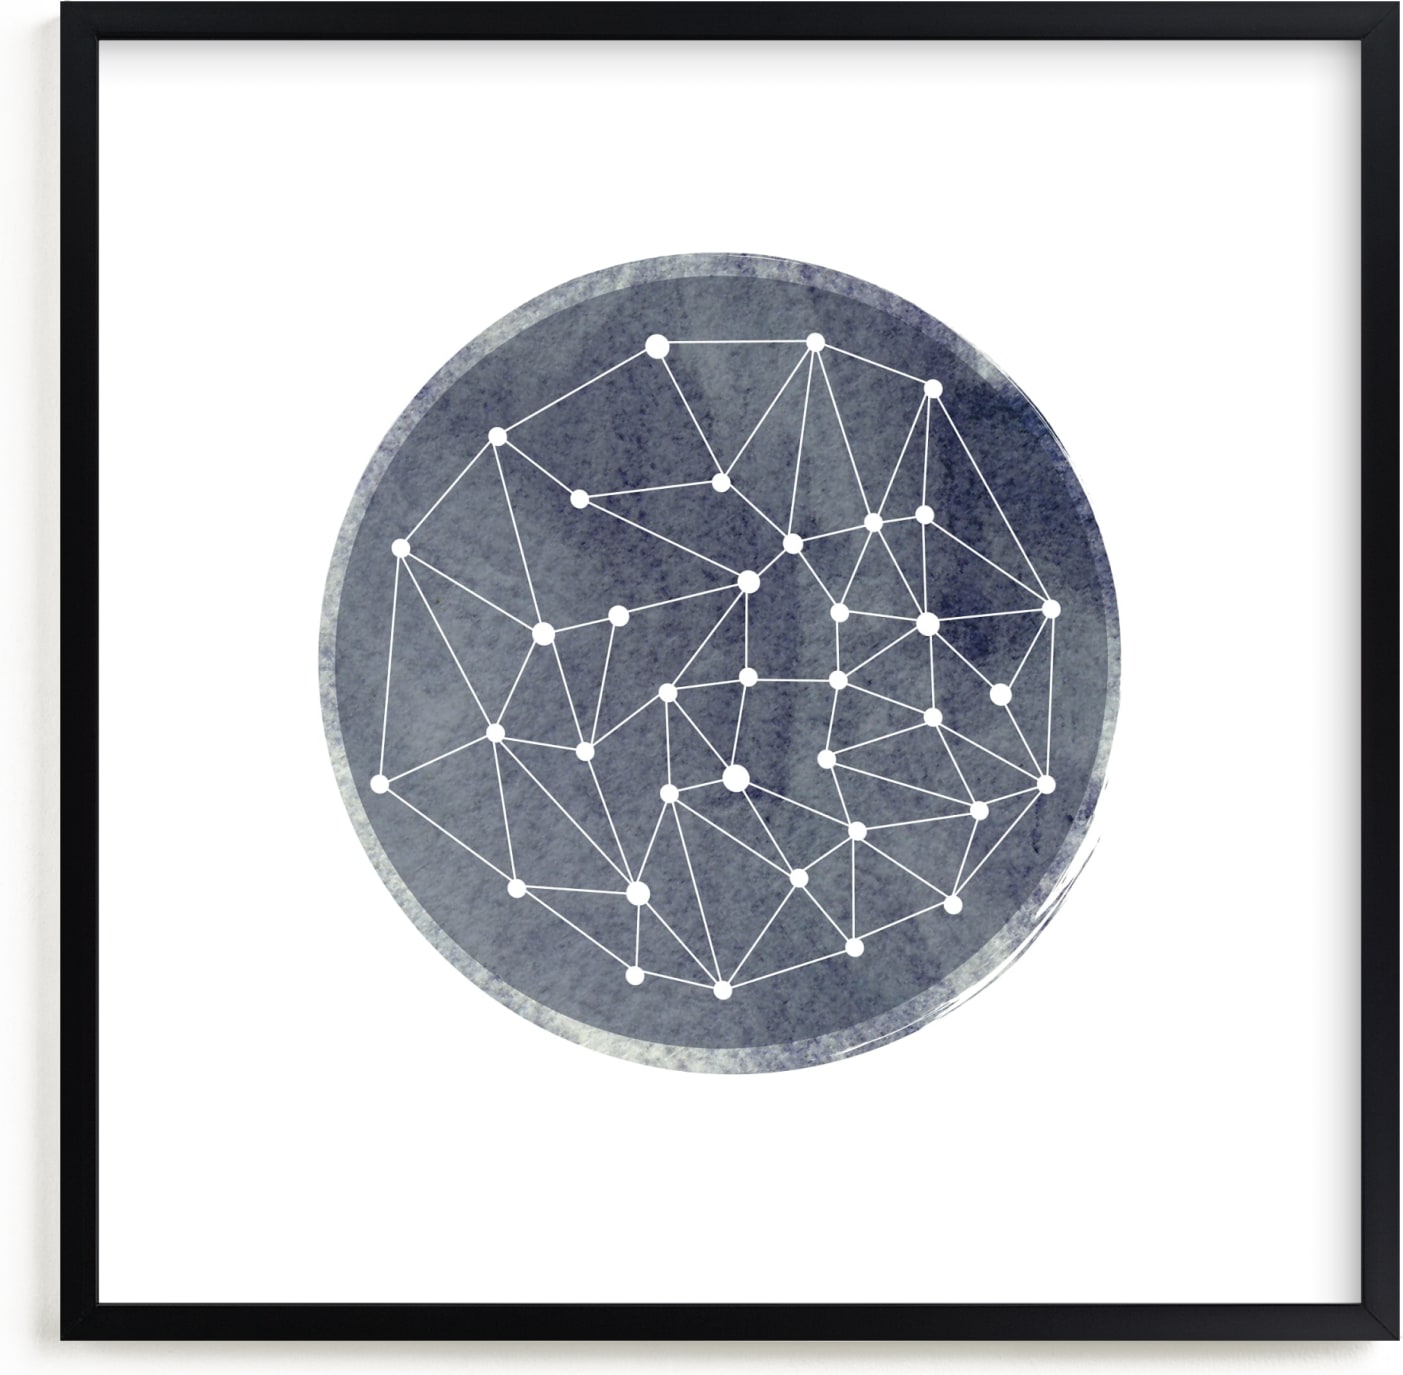 This is a blue nursery wall art by Annie Clark called Constellation.